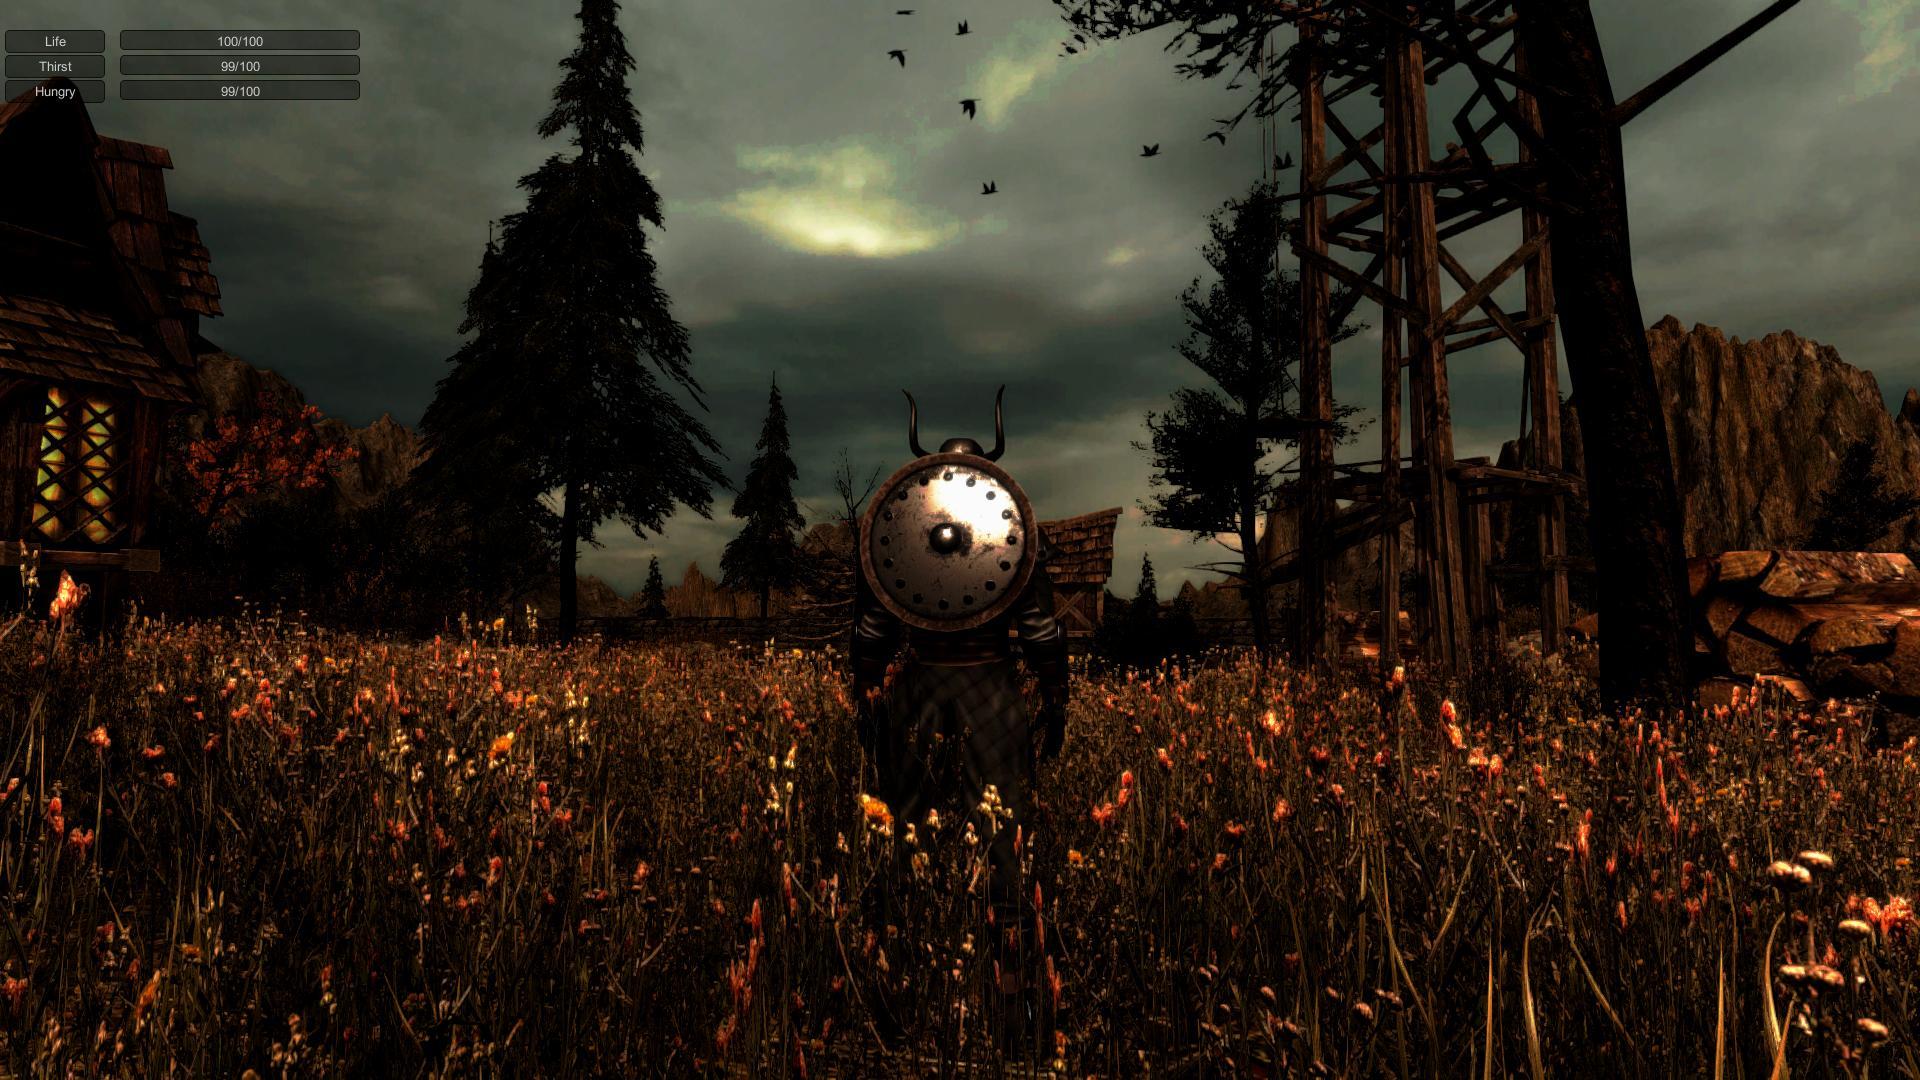 Screenshot №2 from game The Last Hope